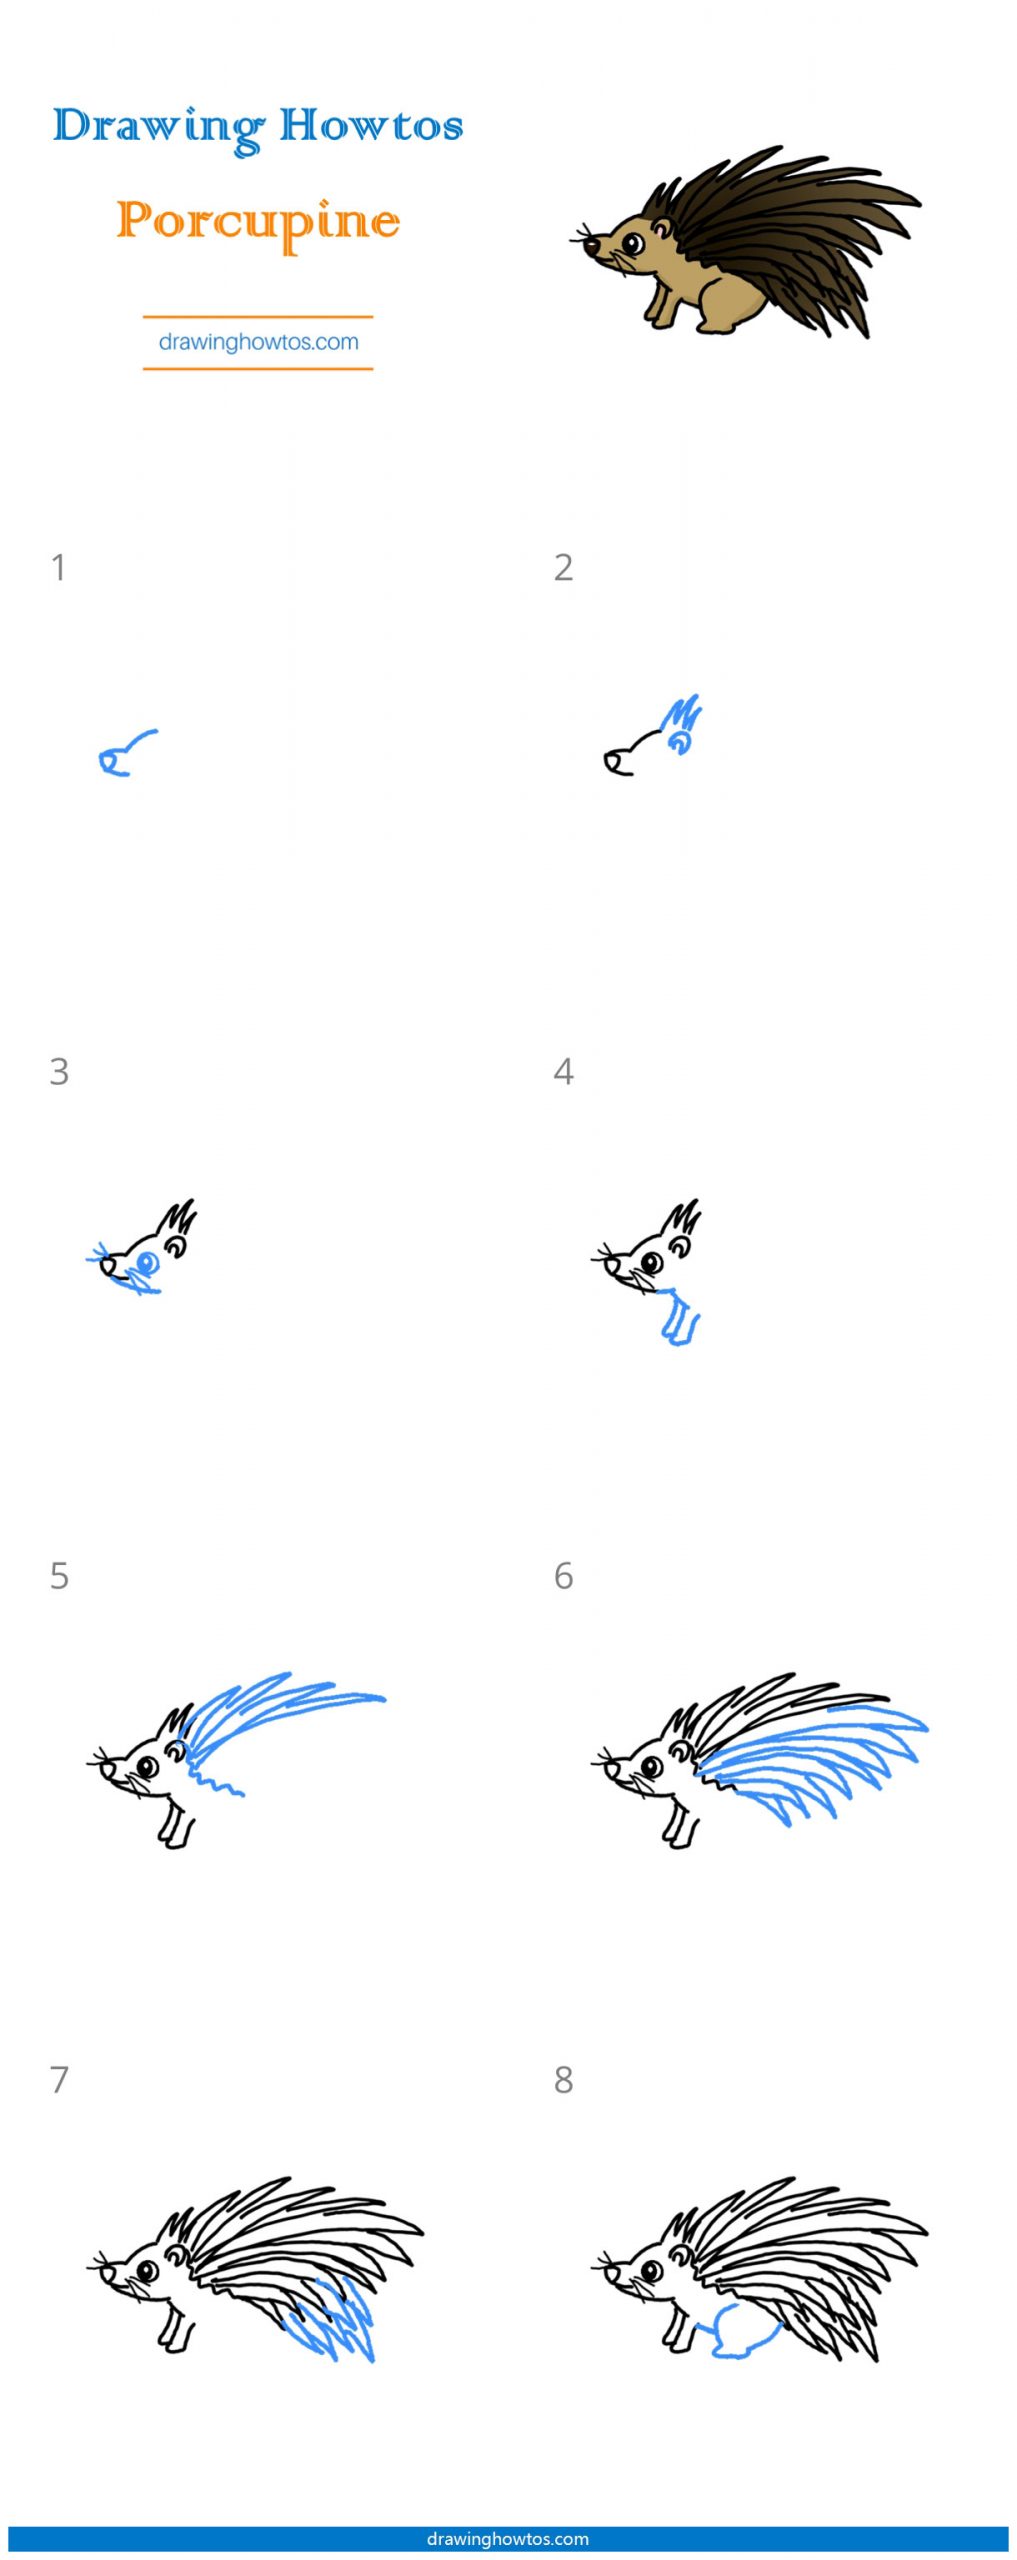 How to Draw a Porcupine Step by Step